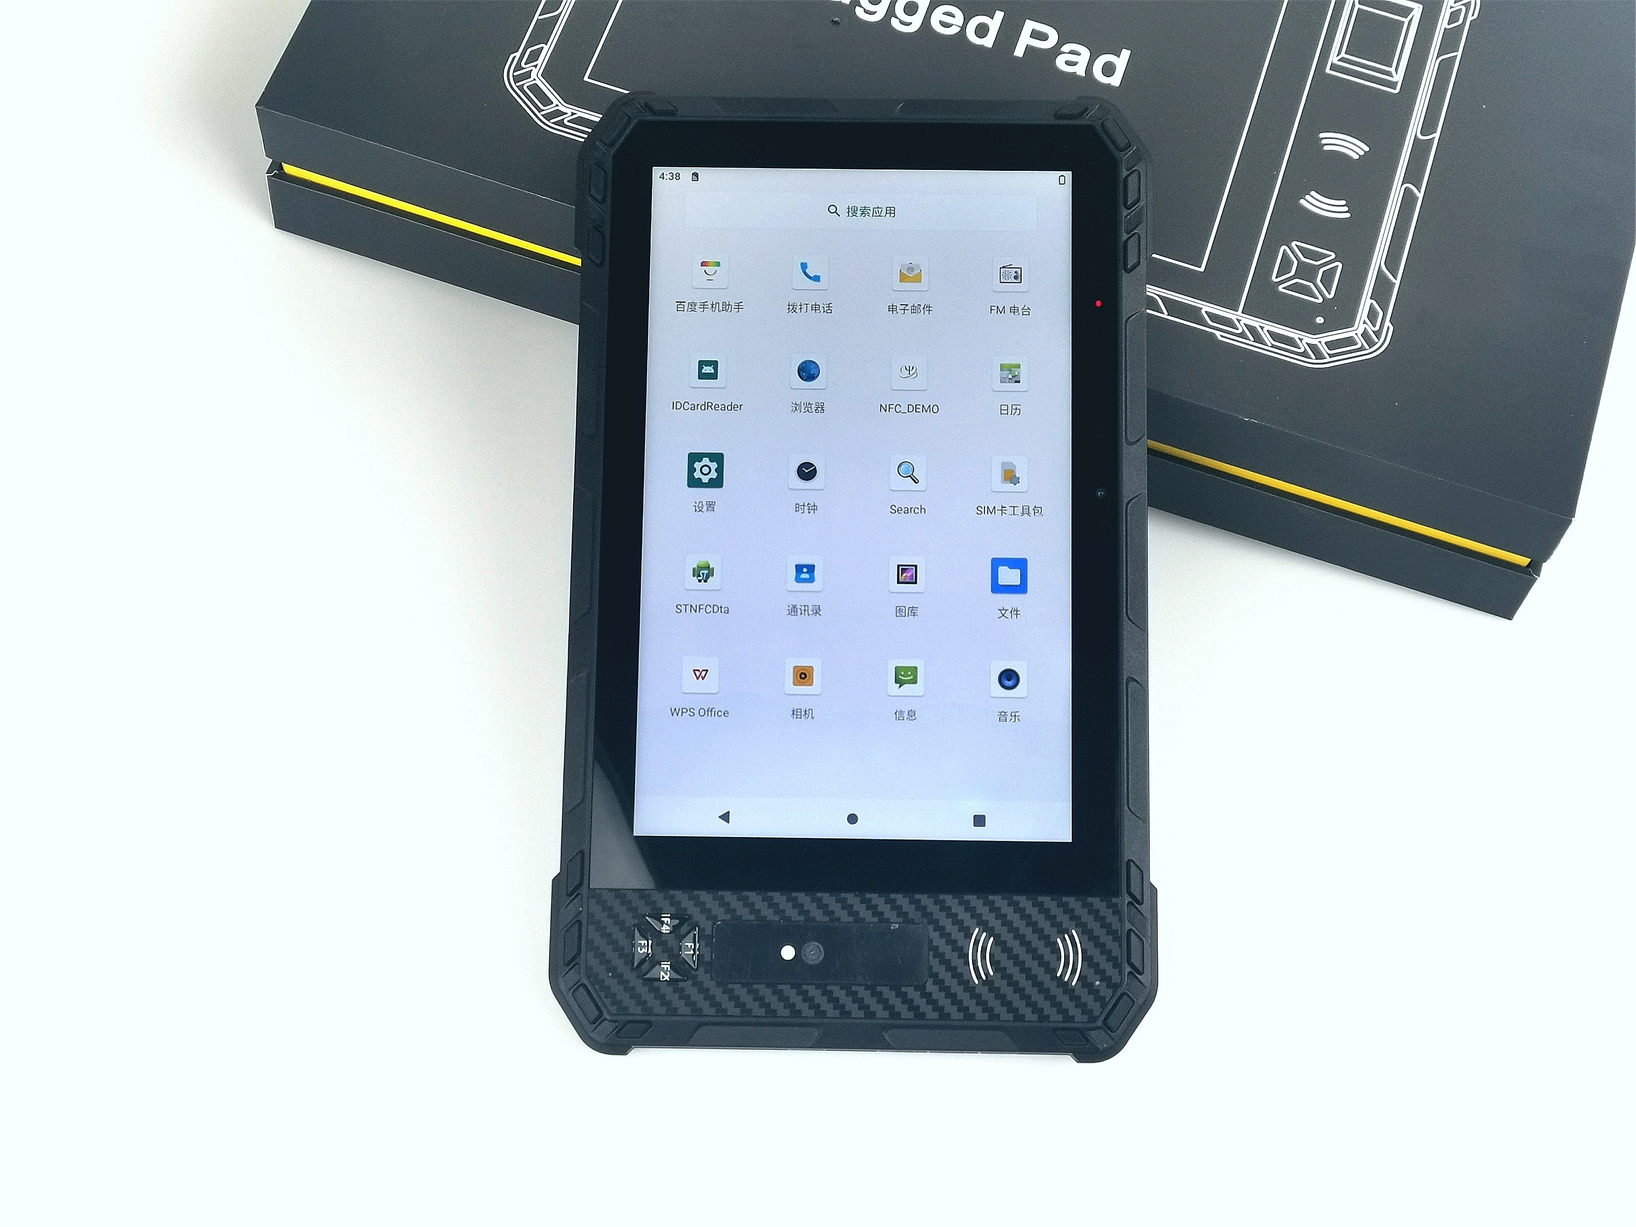 Rugged industrial tablets paired with the latest 5G capabilities: Boosting modern industrial product